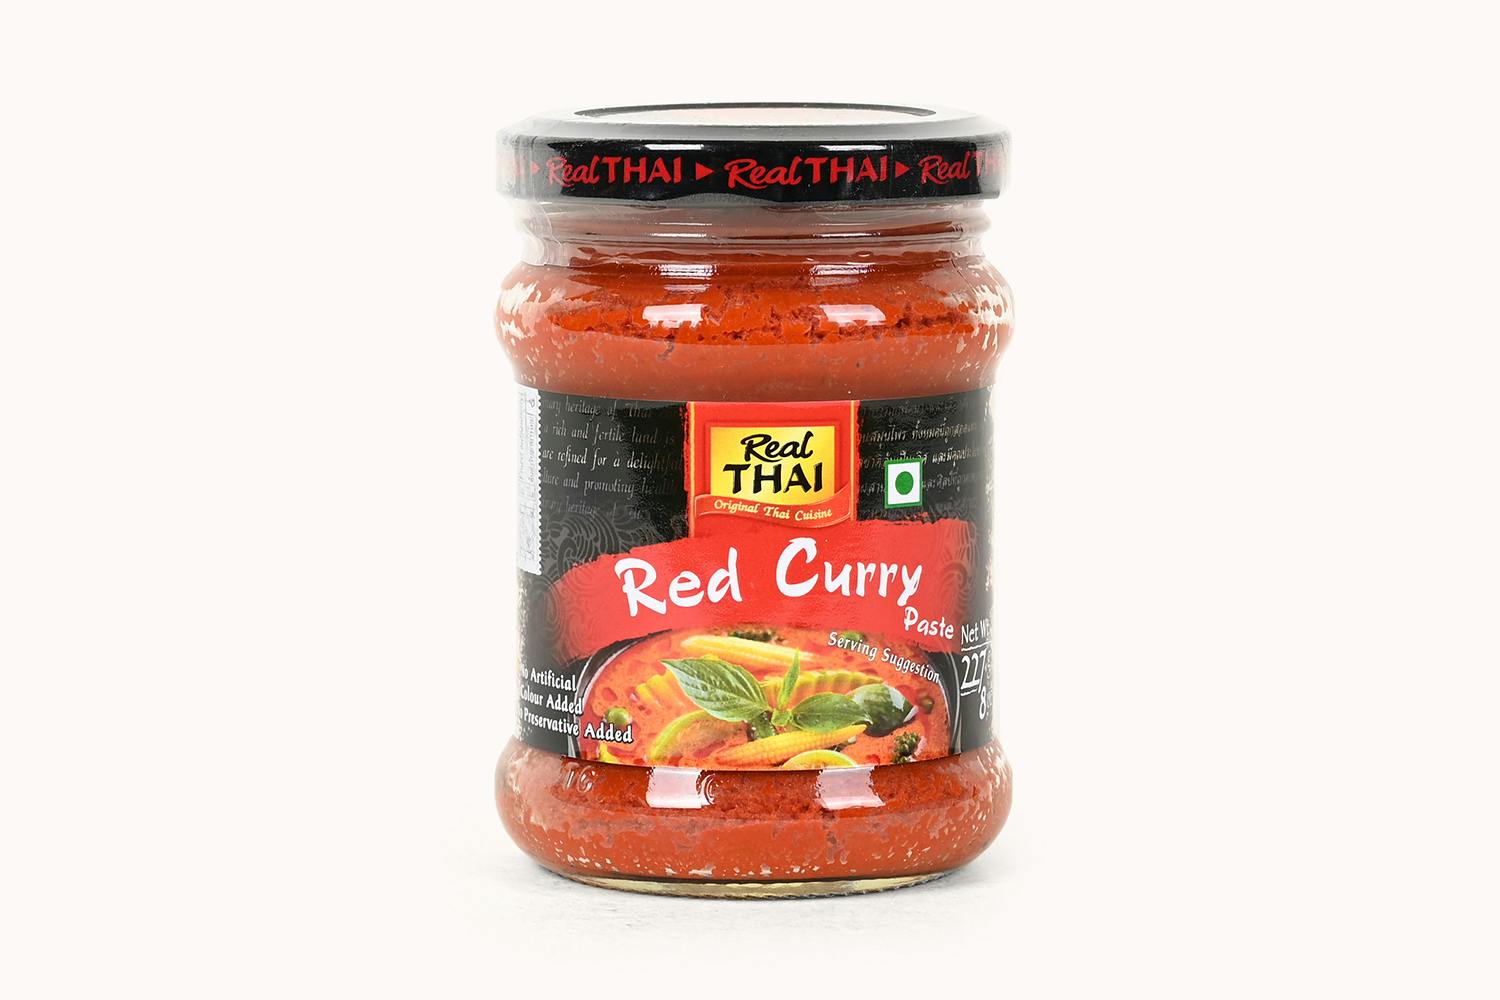 Real Thai Red Curry Paste